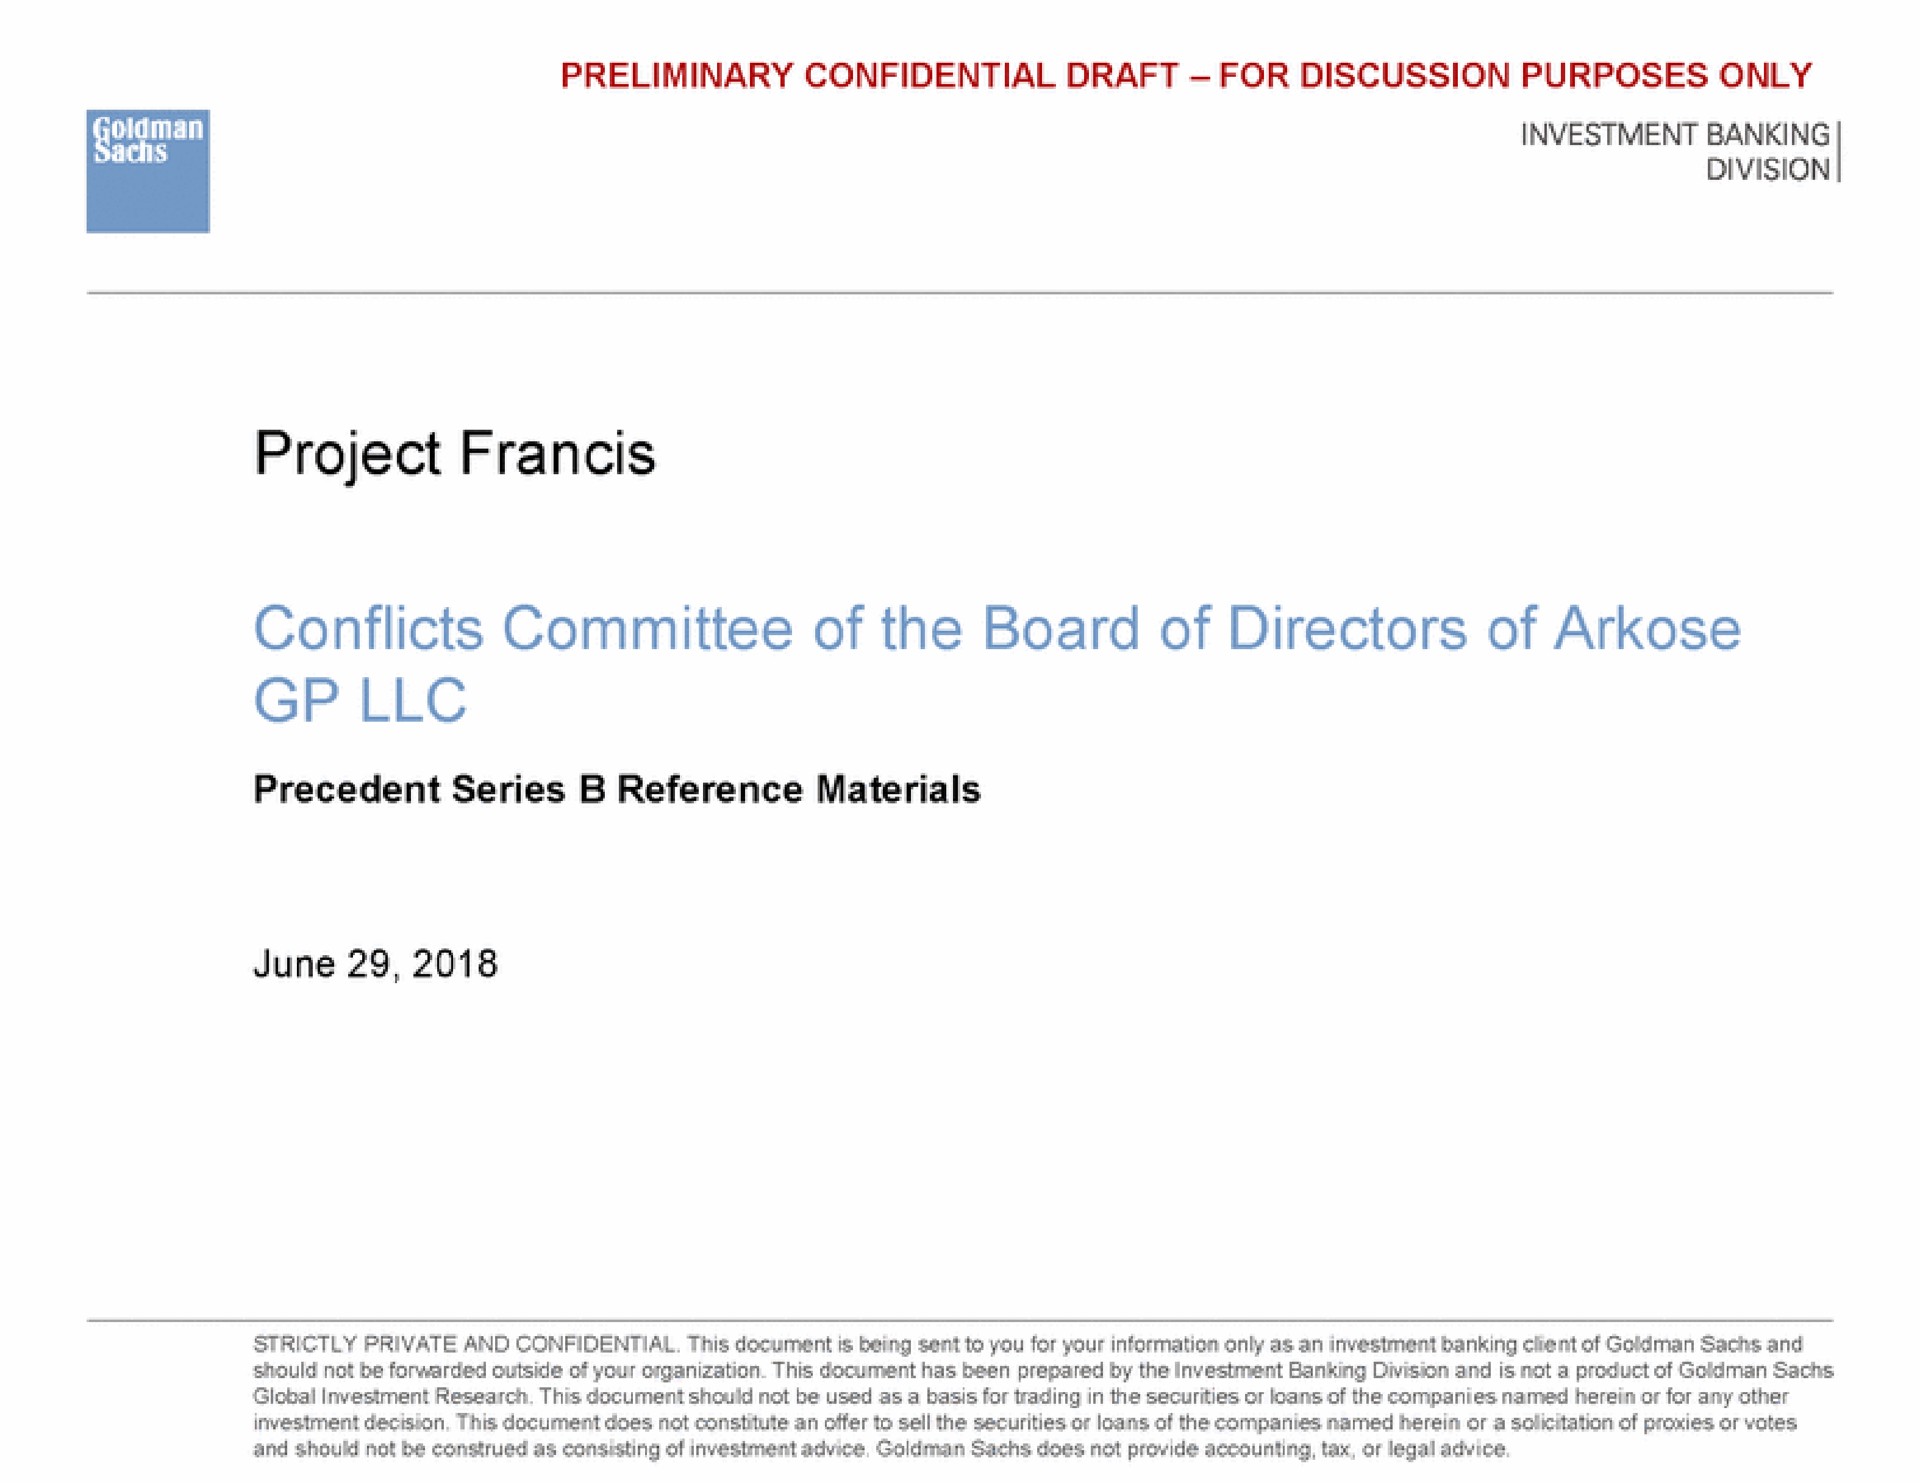 project conflicts committee of the board of directors of arkose | Goldman Sachs